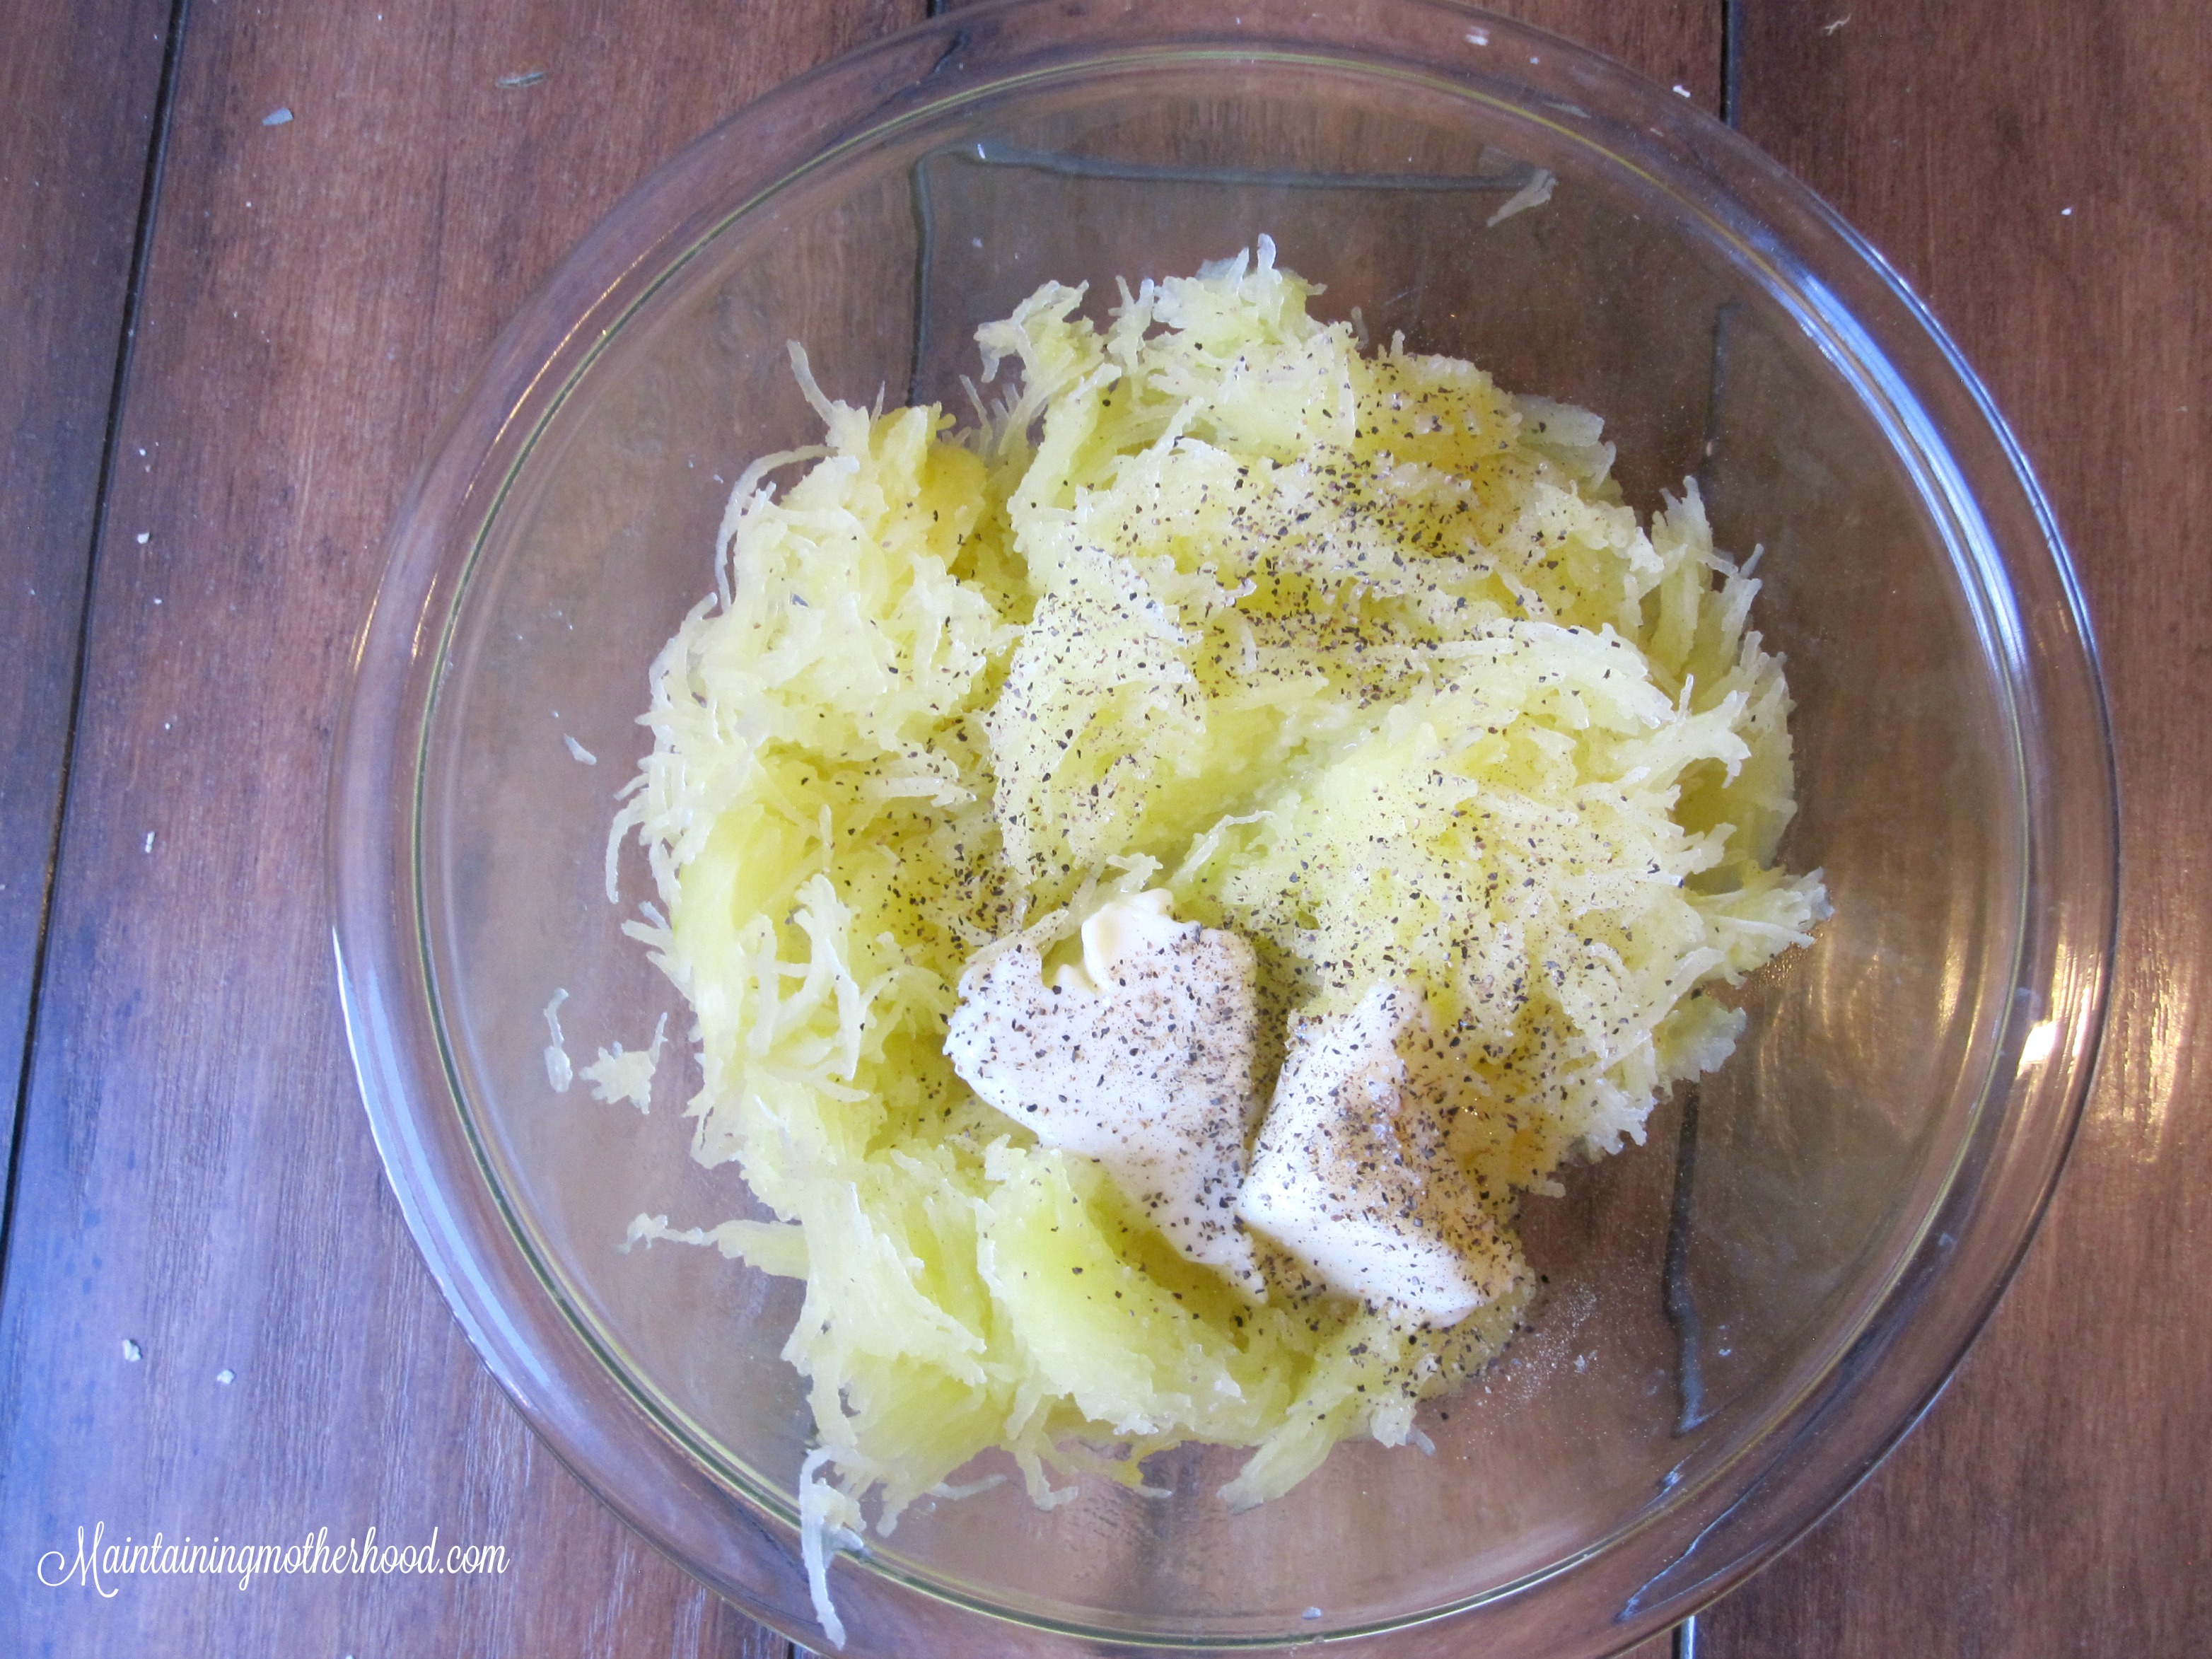 Spaghetti squash stores well, is simple to cook, and has a mild flavor so my kids will eat it. It can also easily substitute for spaghetti noodles!